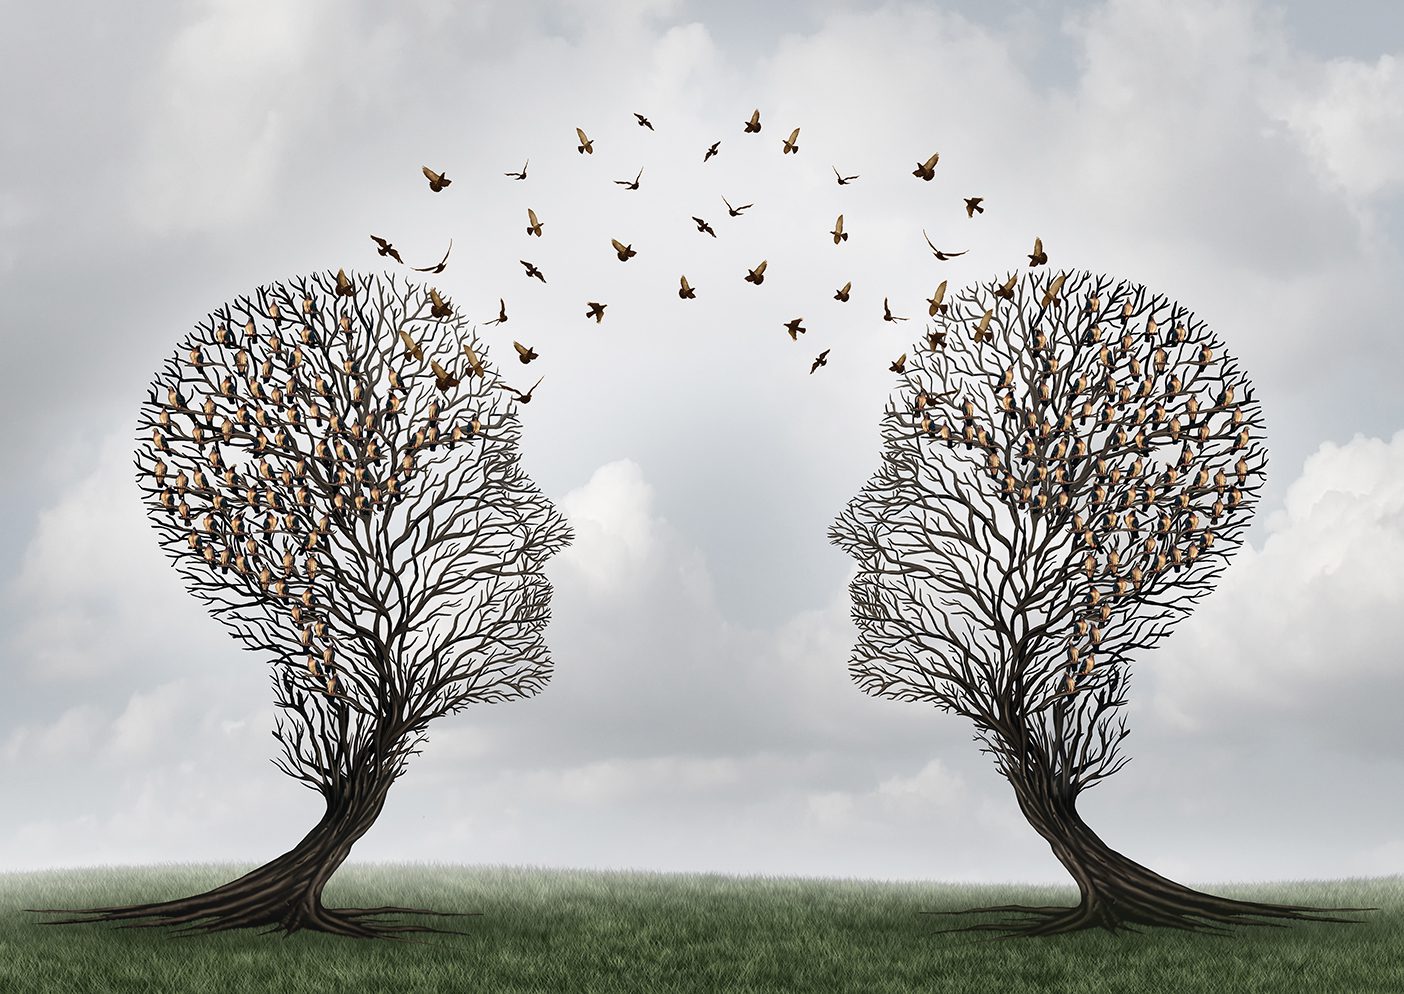 Illustration of two trees shaped like human heads with birds flying between them.